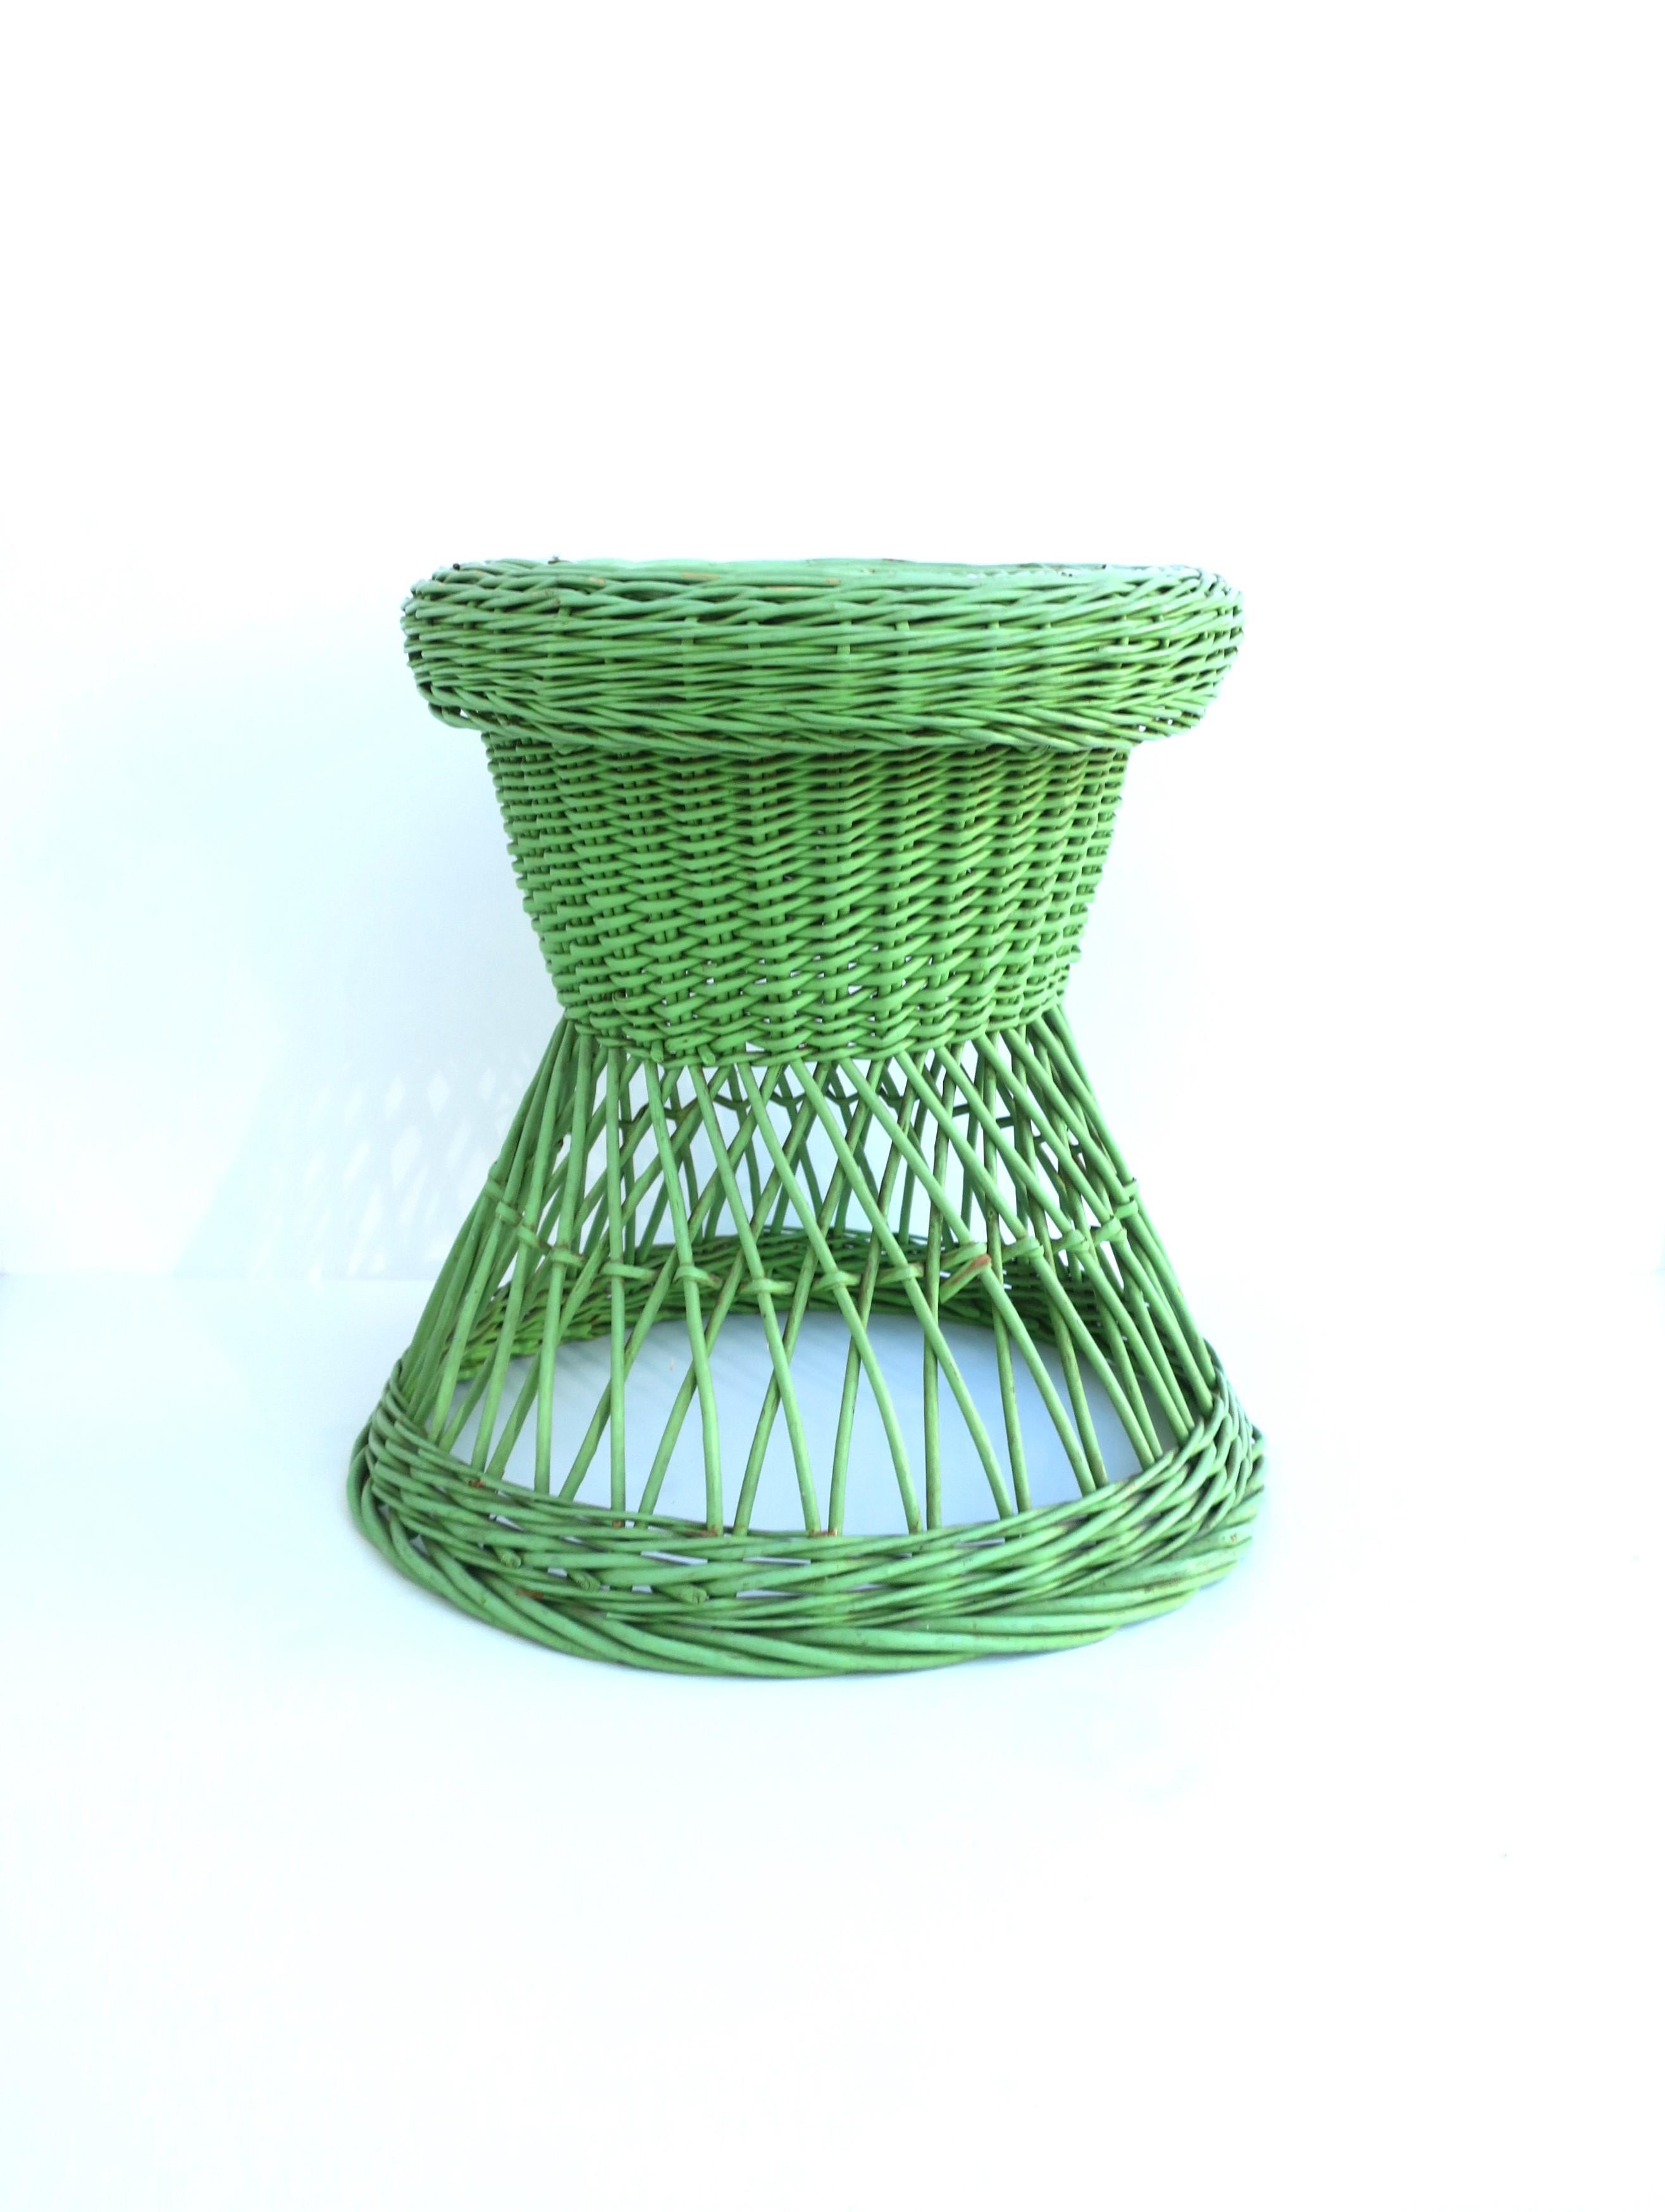 A pistachio green wicker stool with hourglass shape, circa early to mid-20th century. Use piece as a stool or side/drinks table, plant stand, etc., many uses. Piece is a convenient size. Dimensions: 15.5